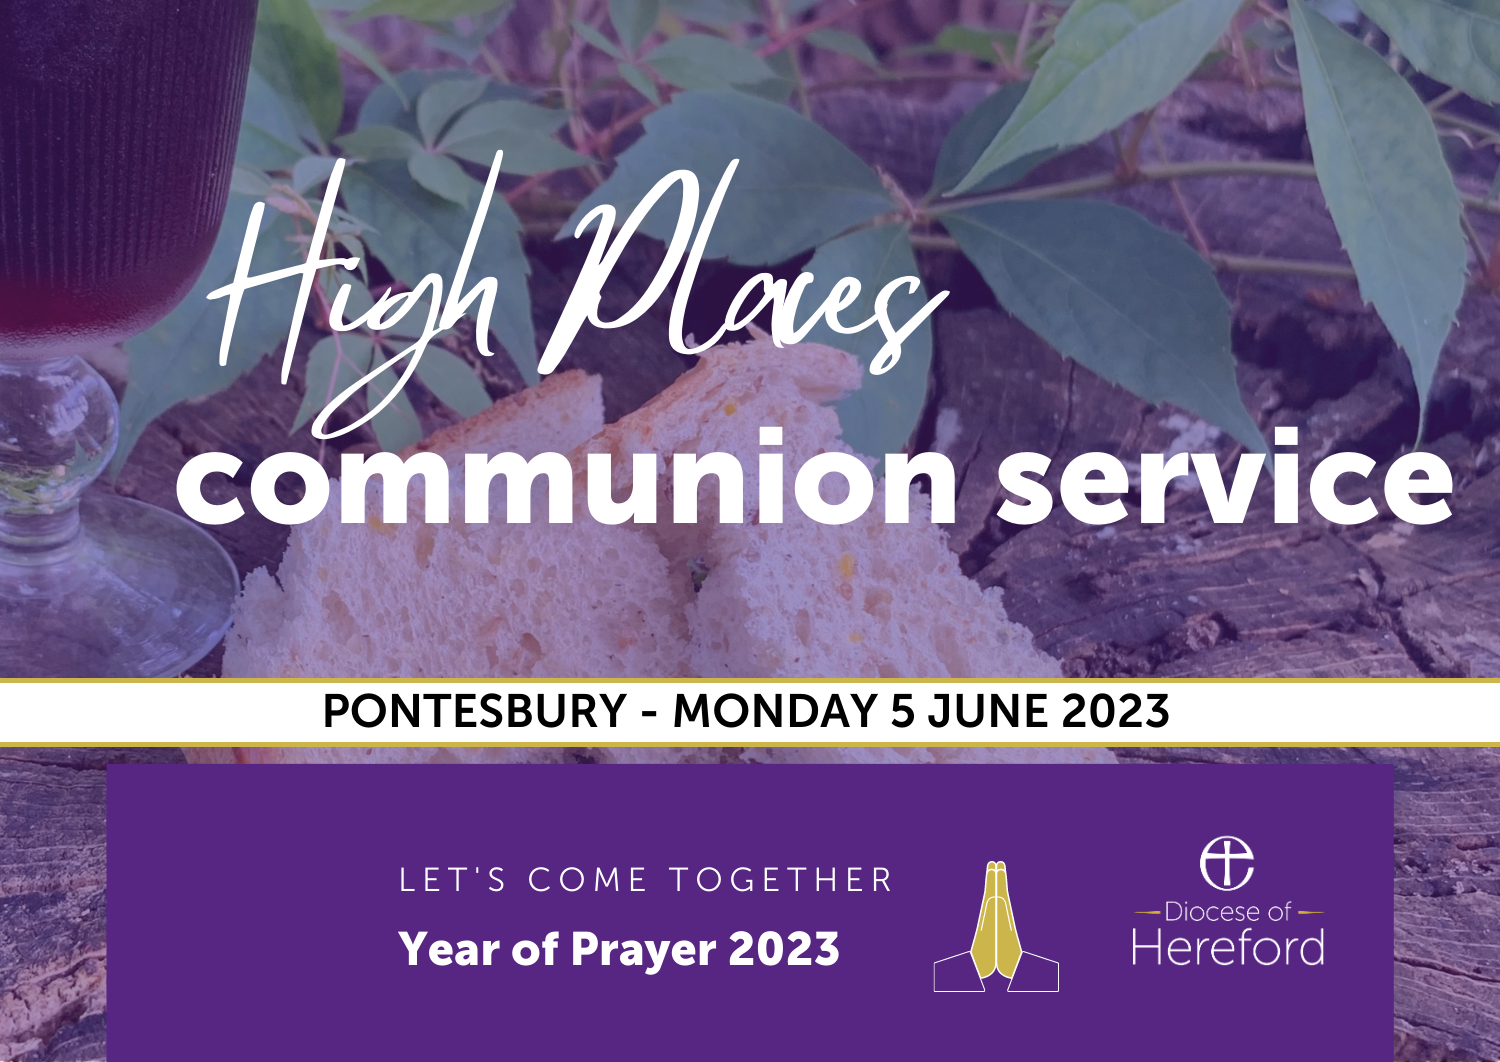 Bread and Wine - Invitation to Holy Communion Service